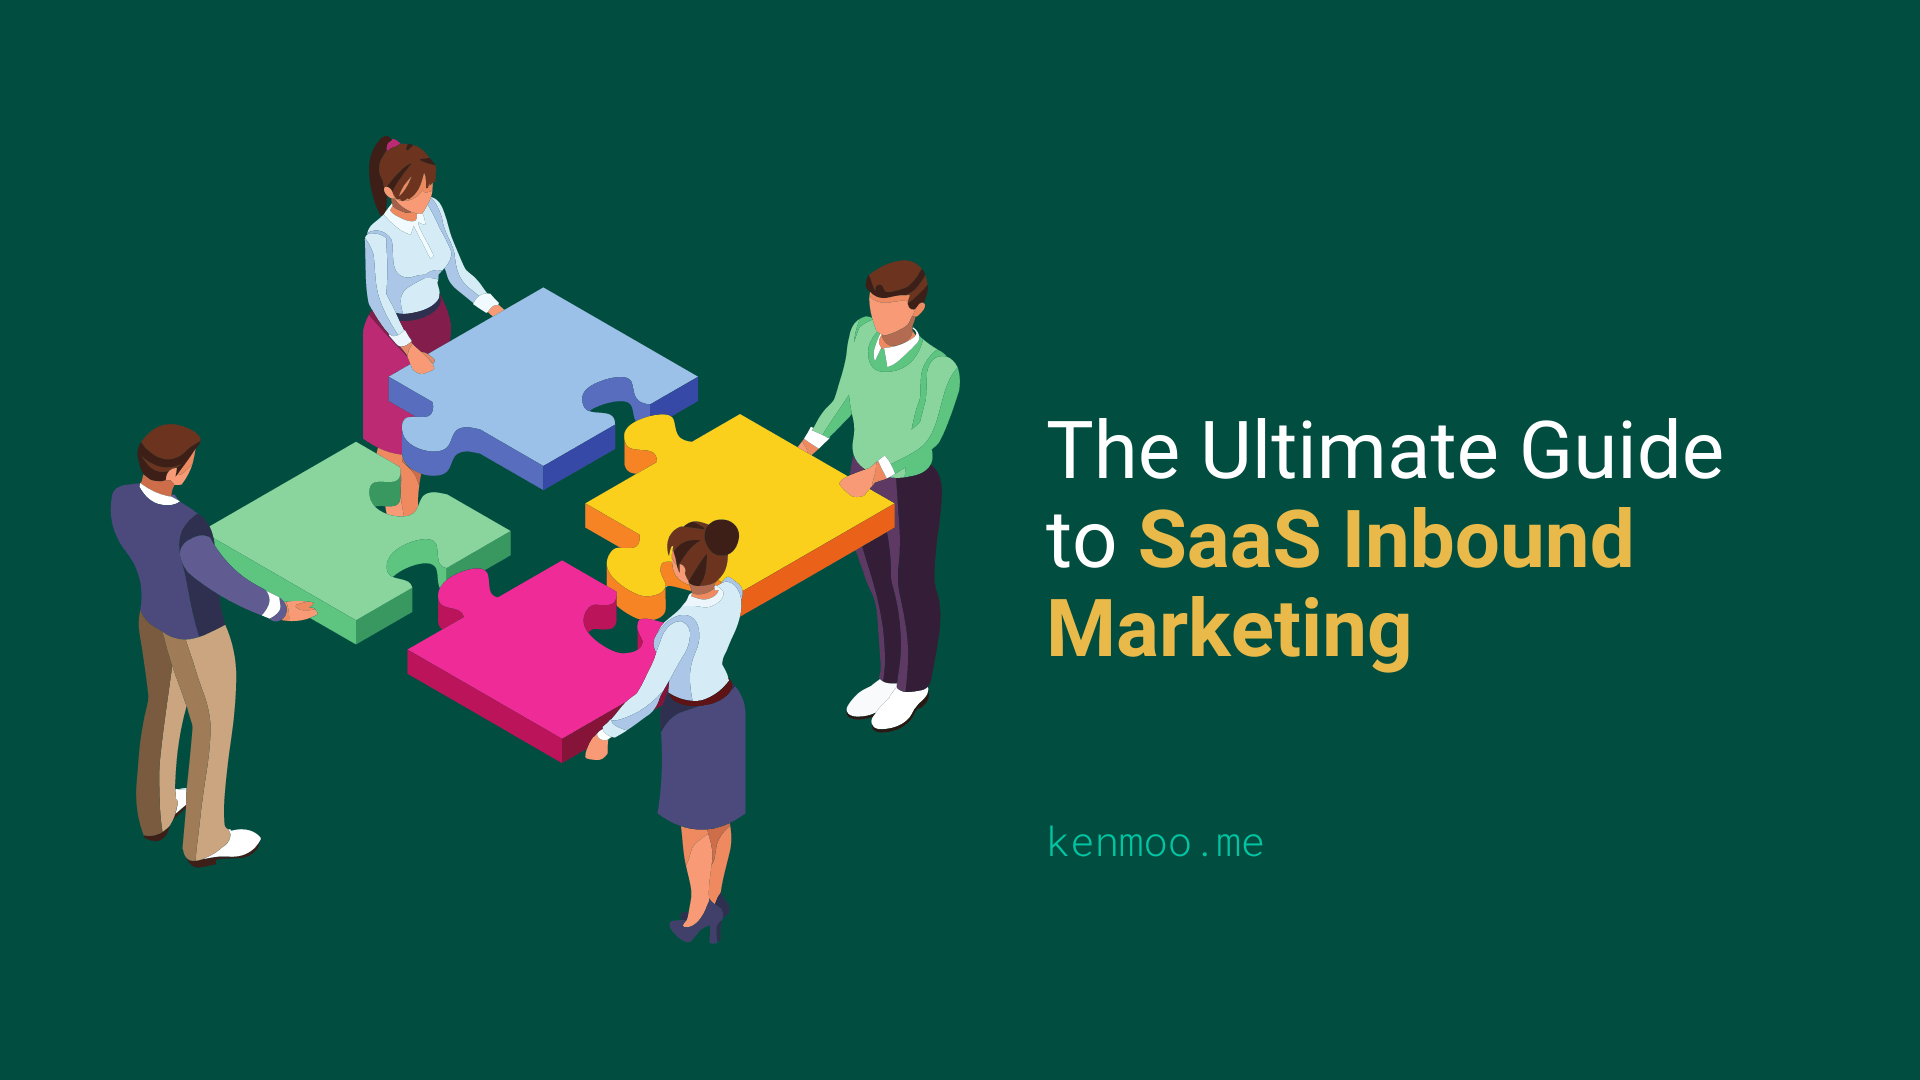 The Ultimate Guide To SaaS Inbound Marketing